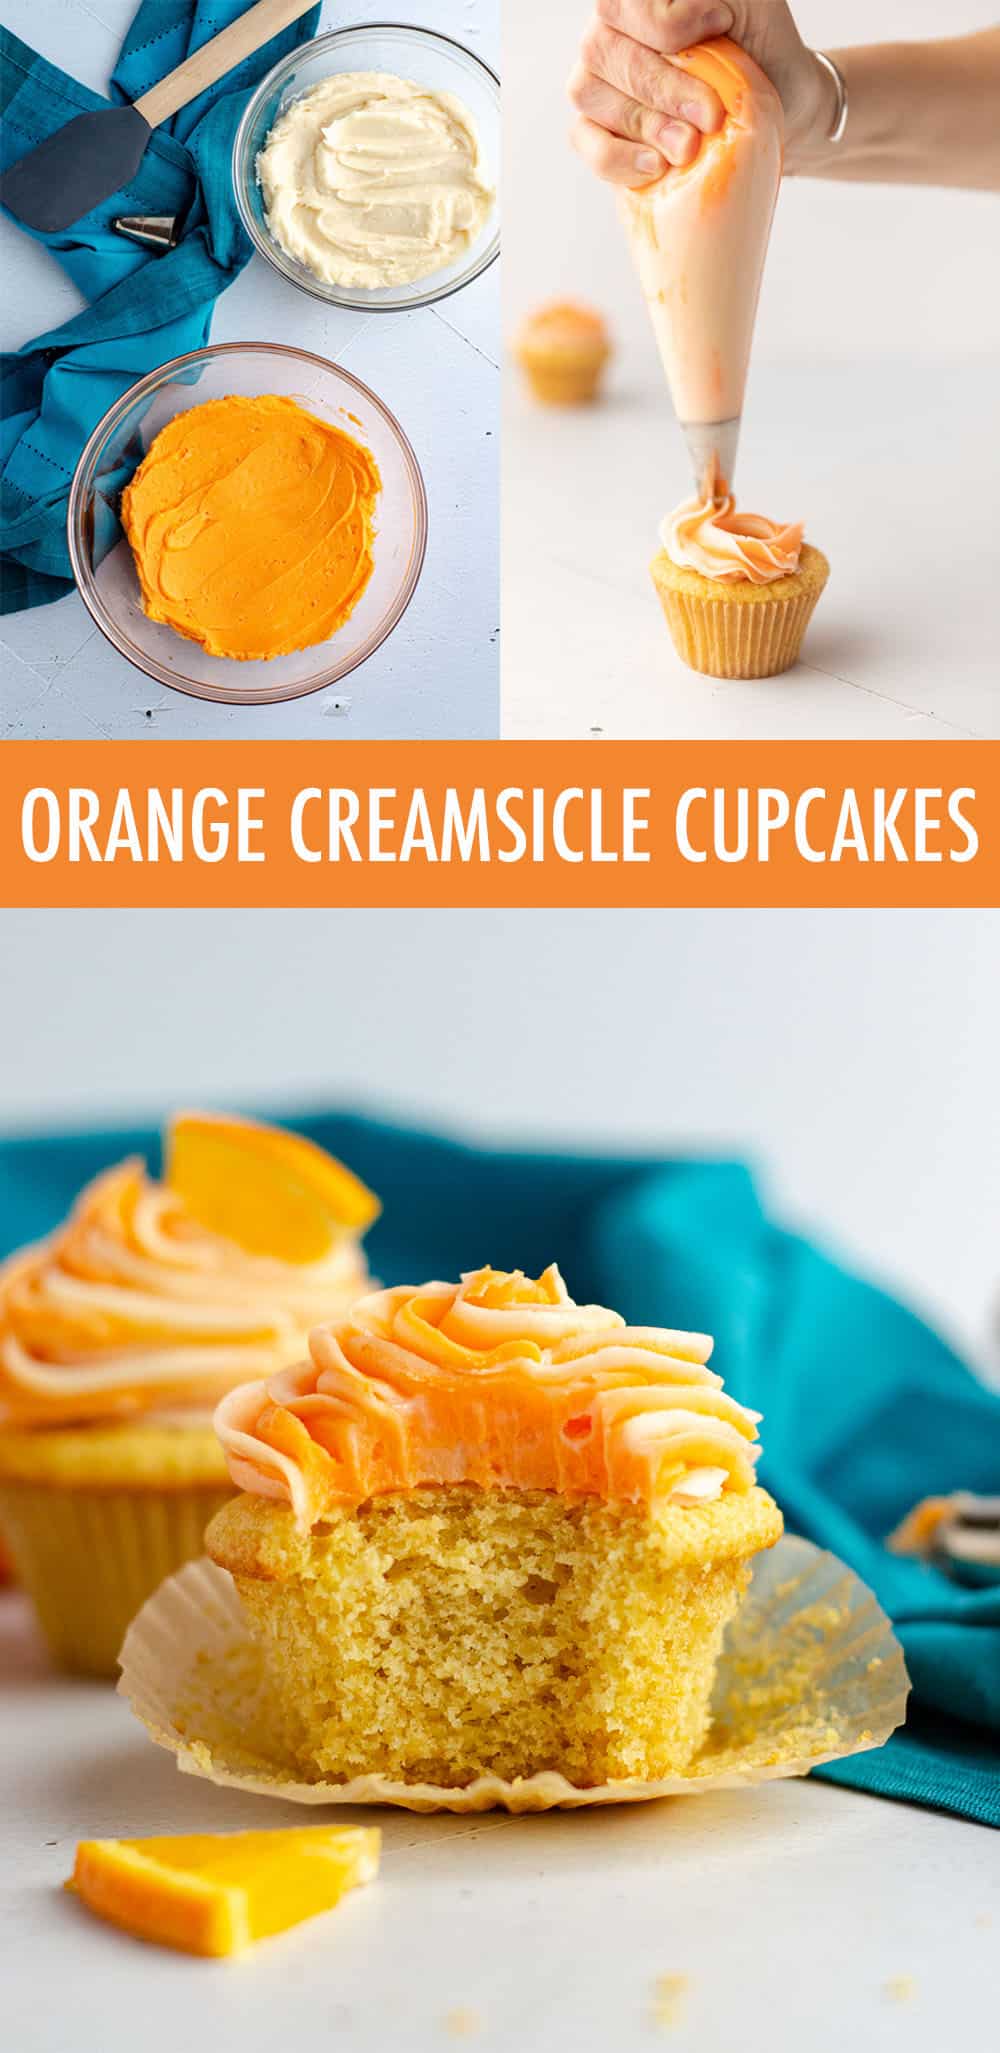 Simple orange cupcakes topped with swirls of orange and cream cheese frostings. via @frshaprilflours